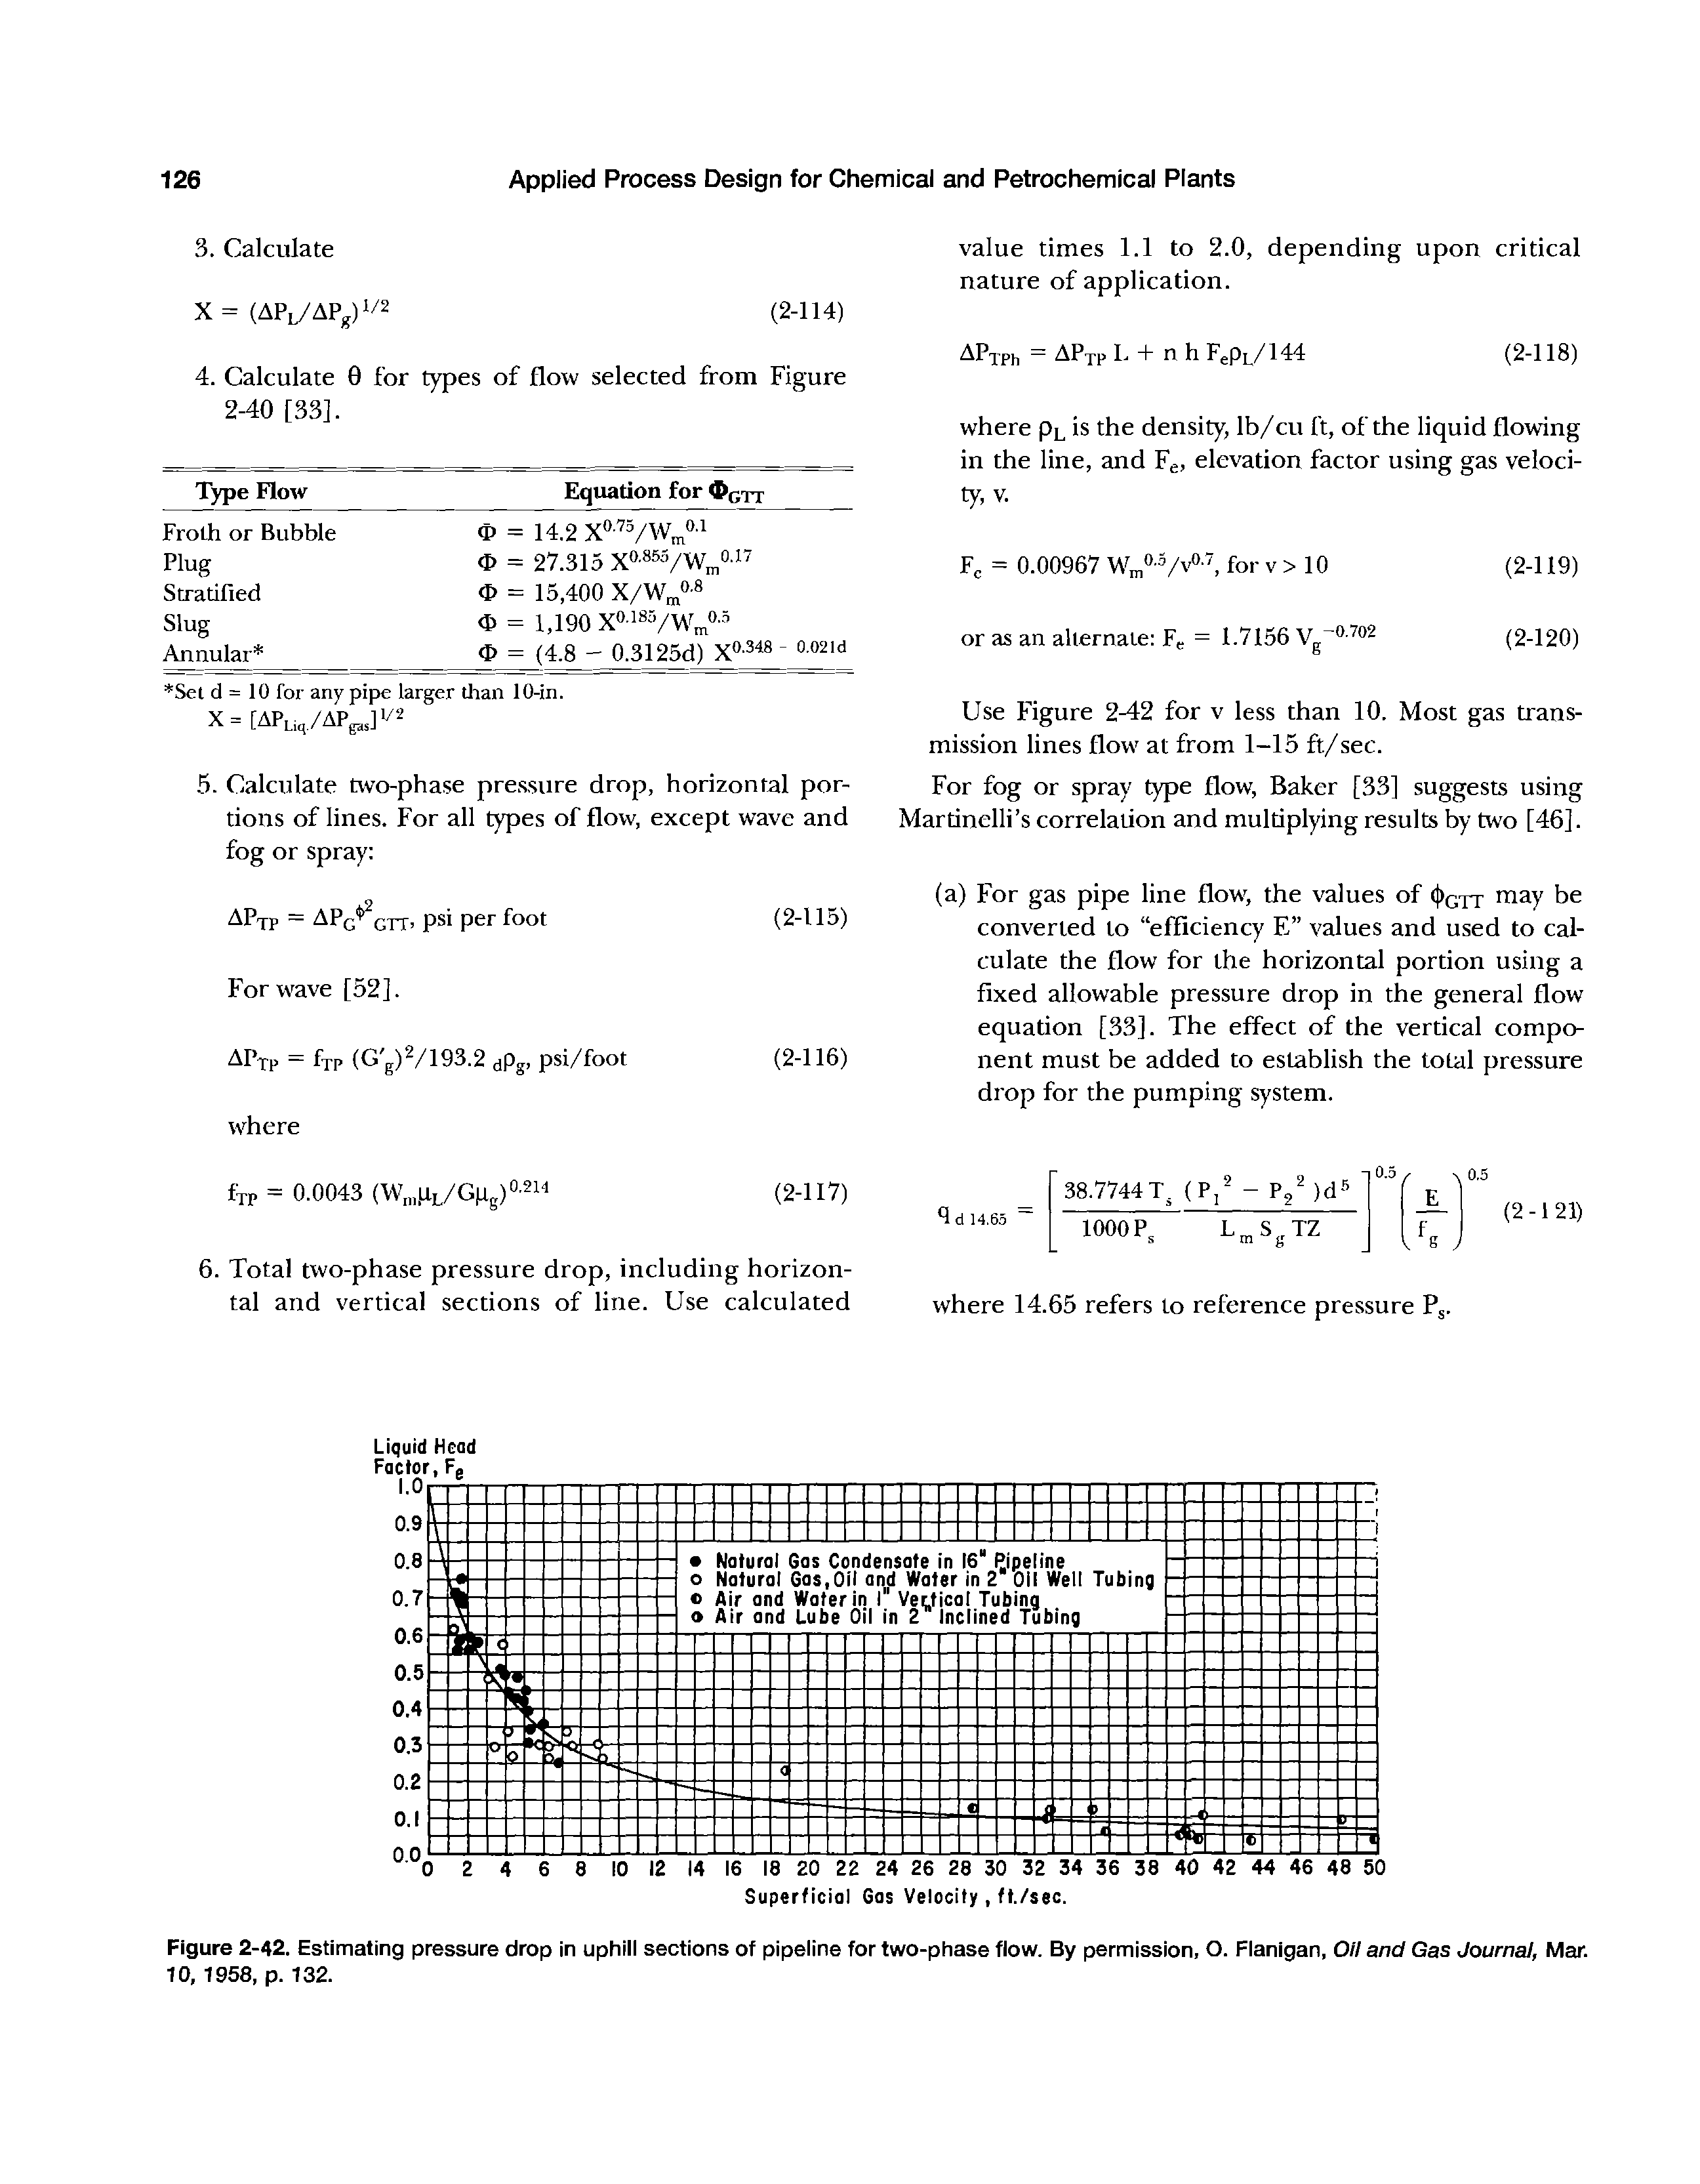 Figure 2-42. Estimating pressure drop in uphiil sections of pipeline for two-phase flow. By permission, O. Flanigan, Oil and Gas Journal, Mar. 10, 1958, p. 132.